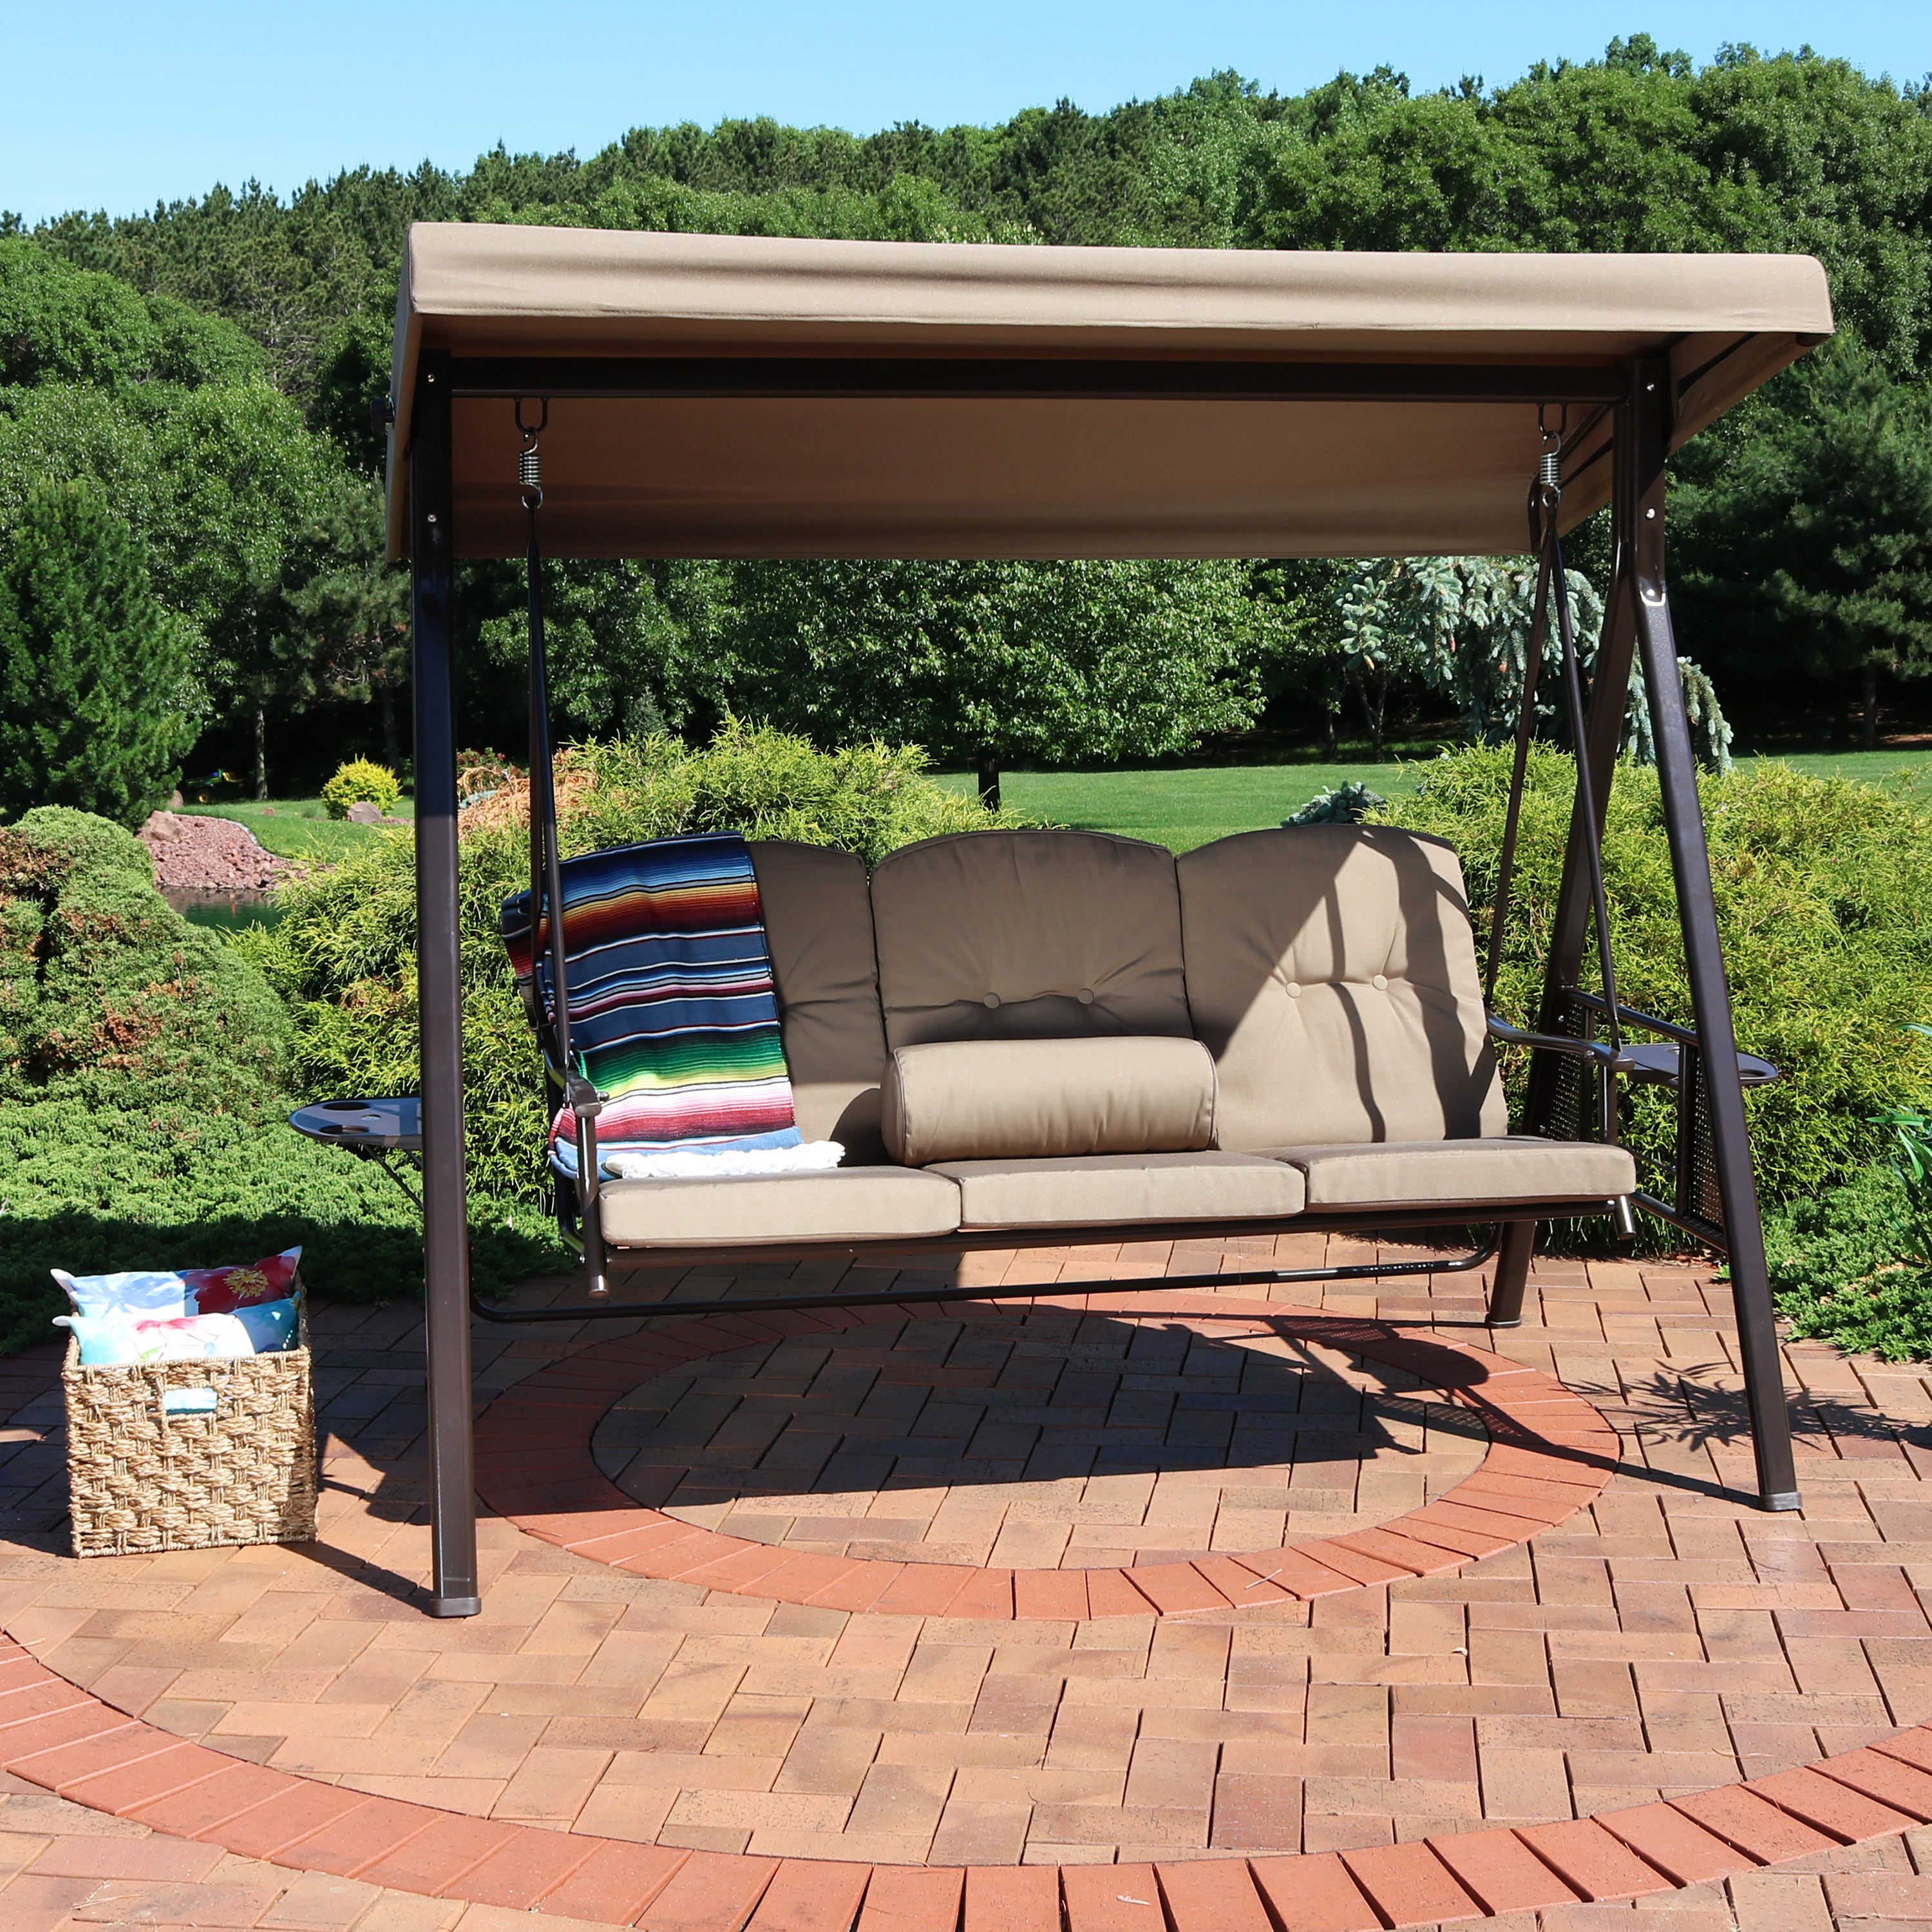 Sunnydaze 3-Person Patio Swing with Adjustable Canopy and Cushions - Beige - image 2 of 9